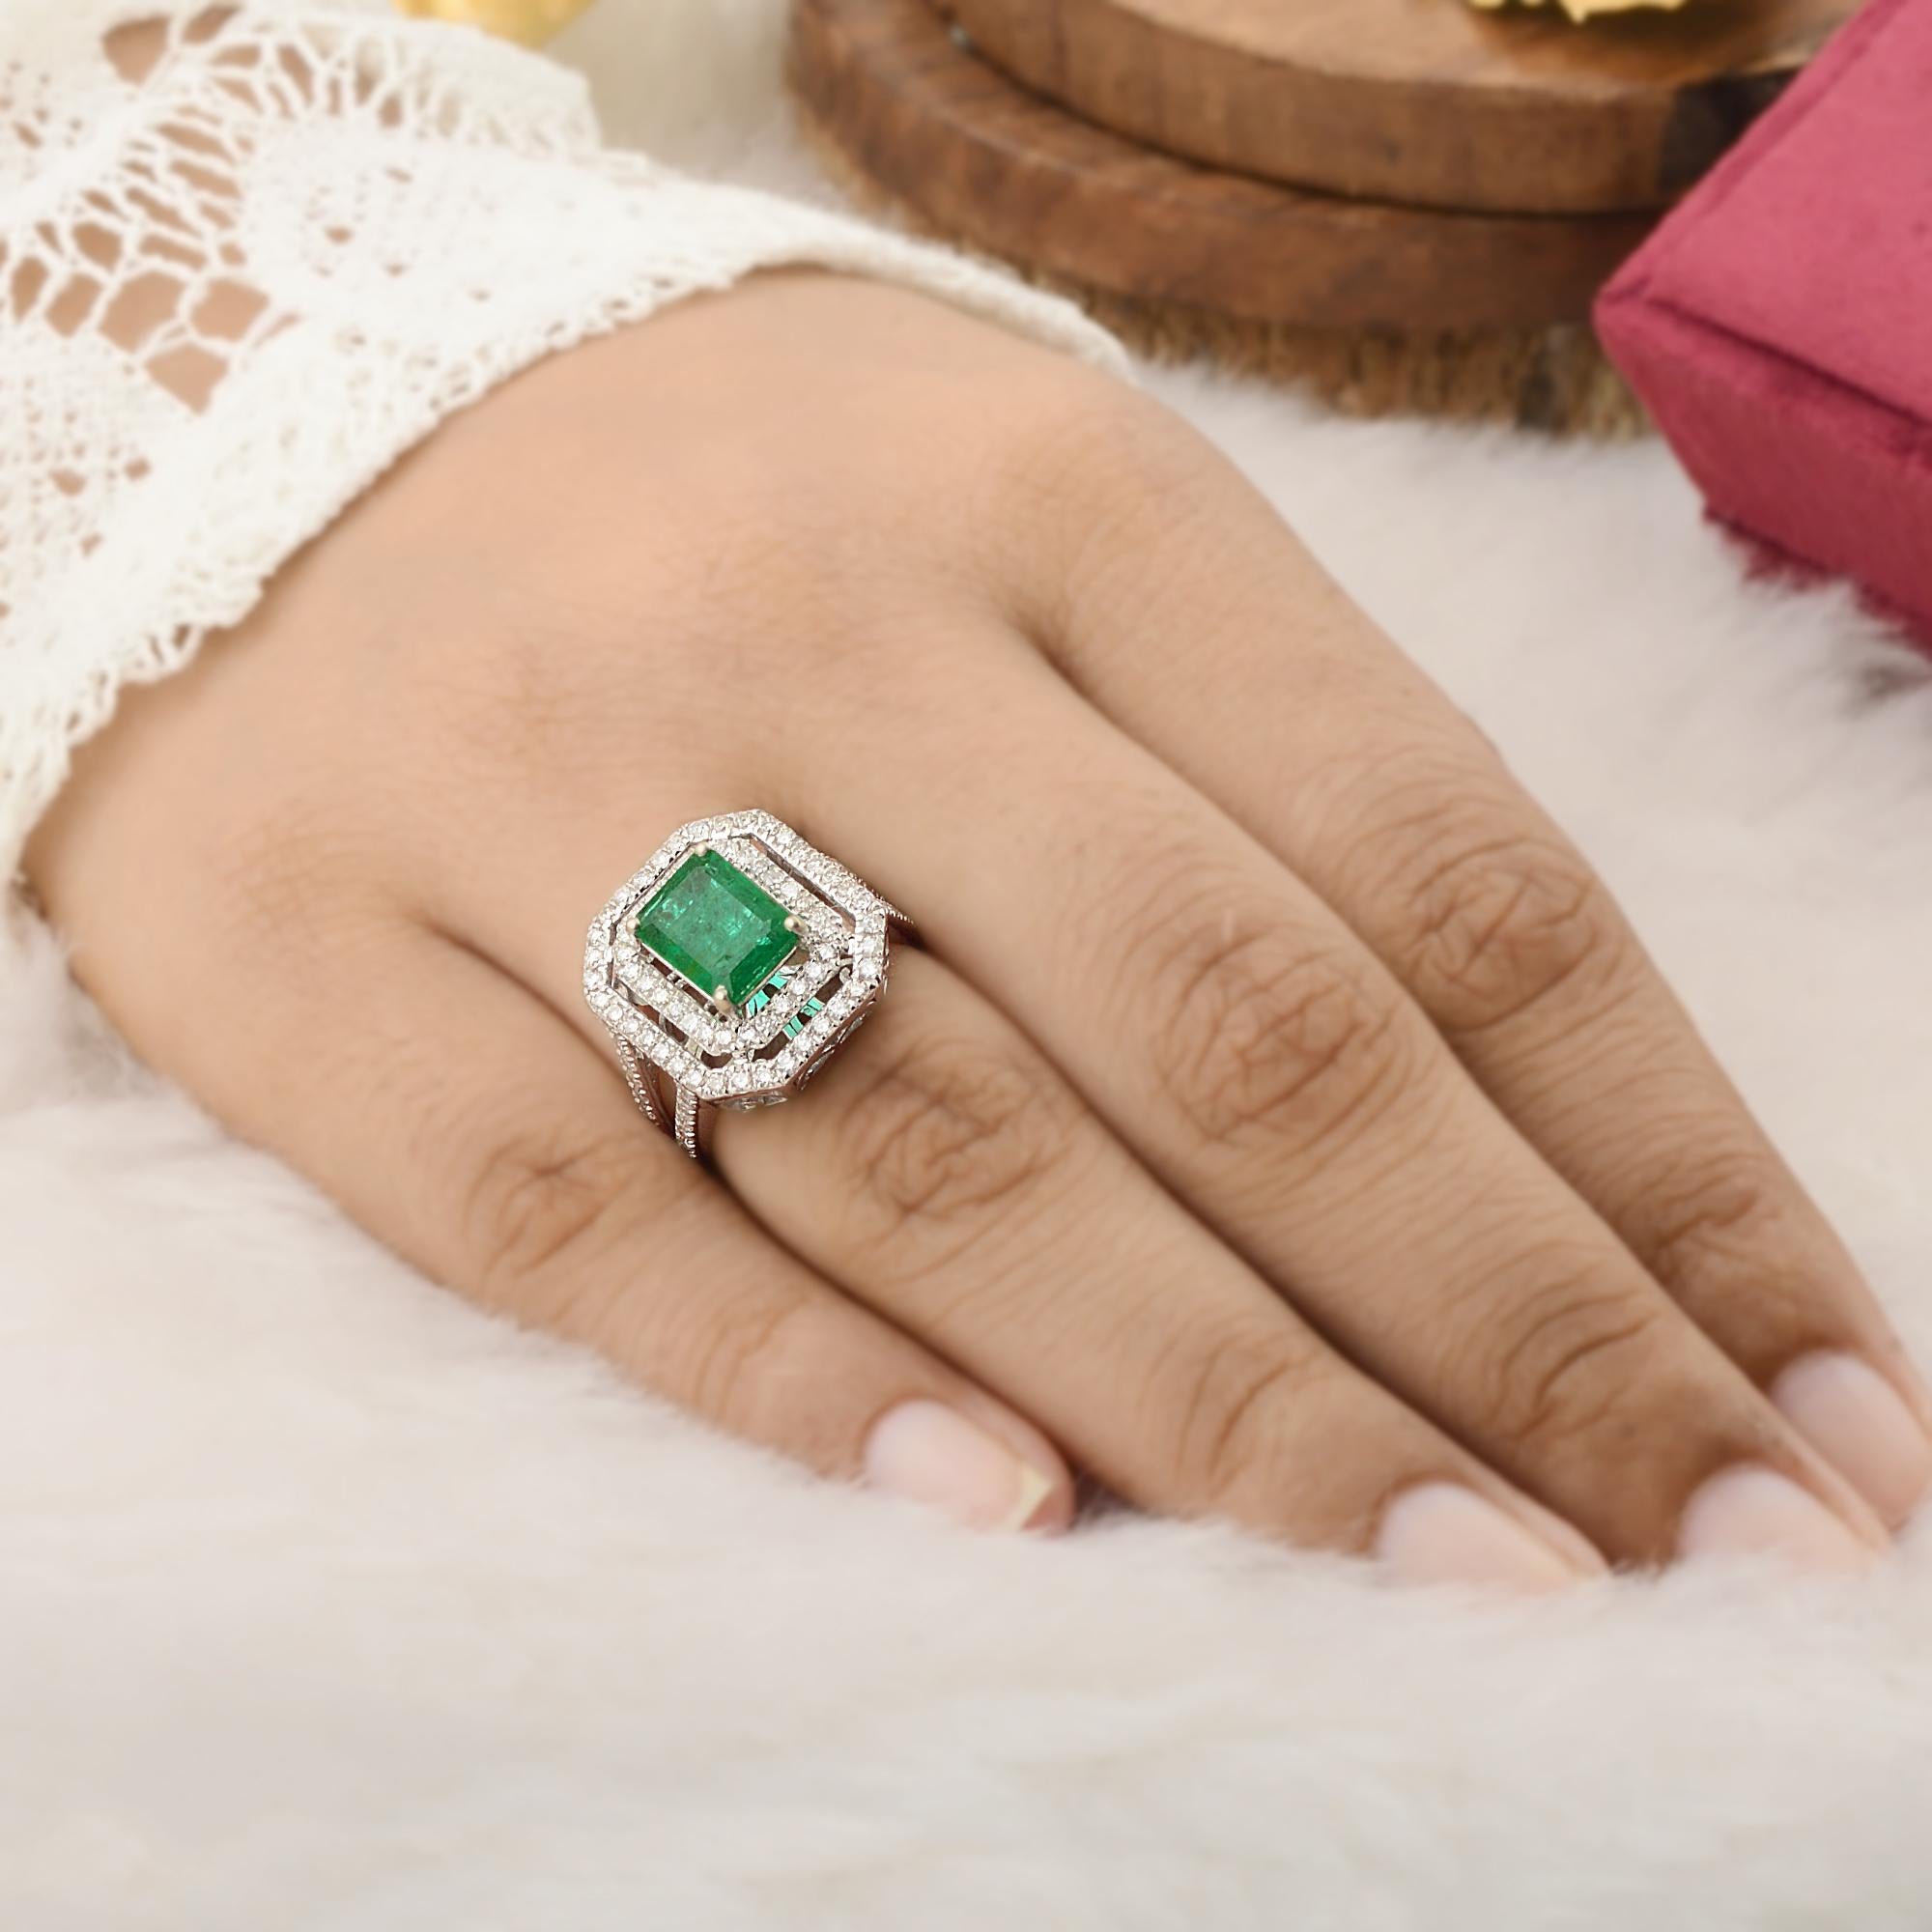 For Sale:  Natural Emerald Cocktail Ring Diamond Pave 10k White Gold Fine Handmade Jewelry 4